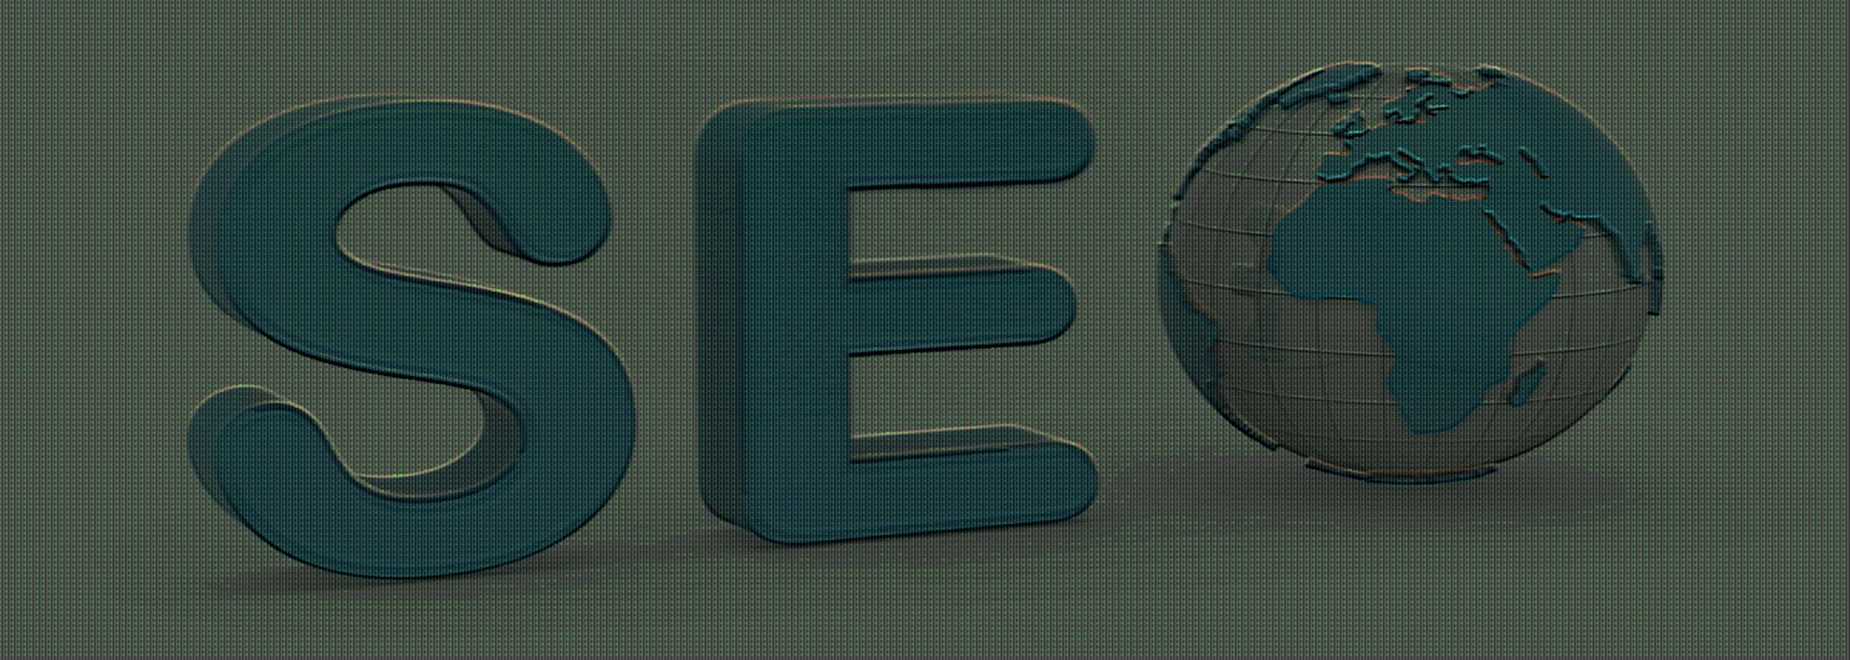 Let Your Existance be on Top while <br> Exploring by Search Engines